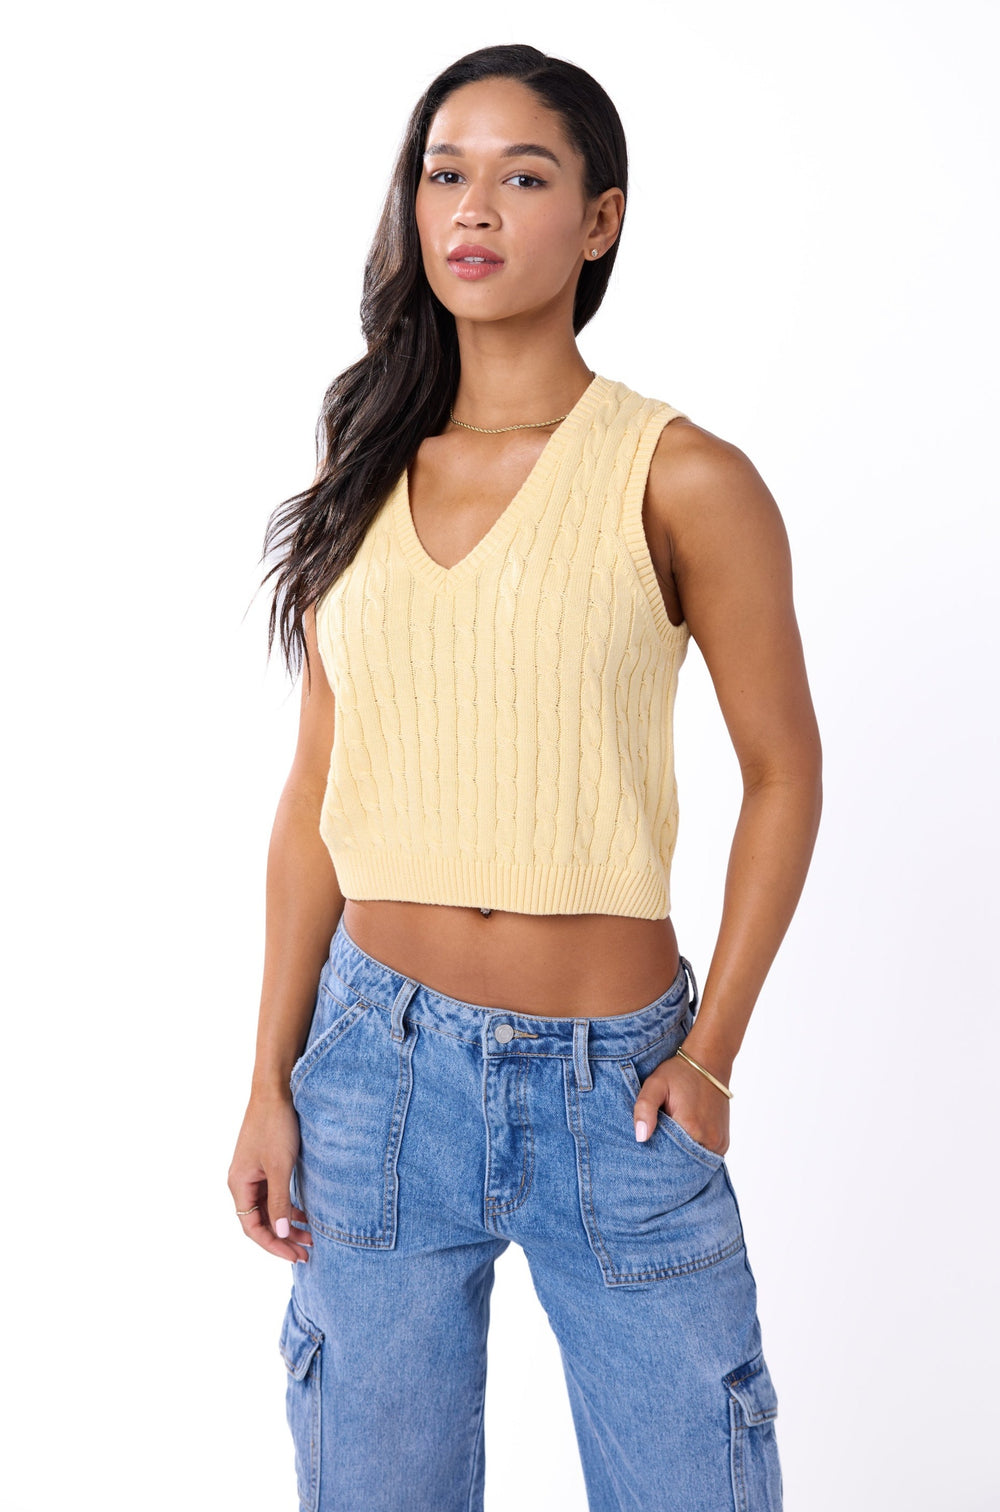 Tiani Cropped Sweater Vest